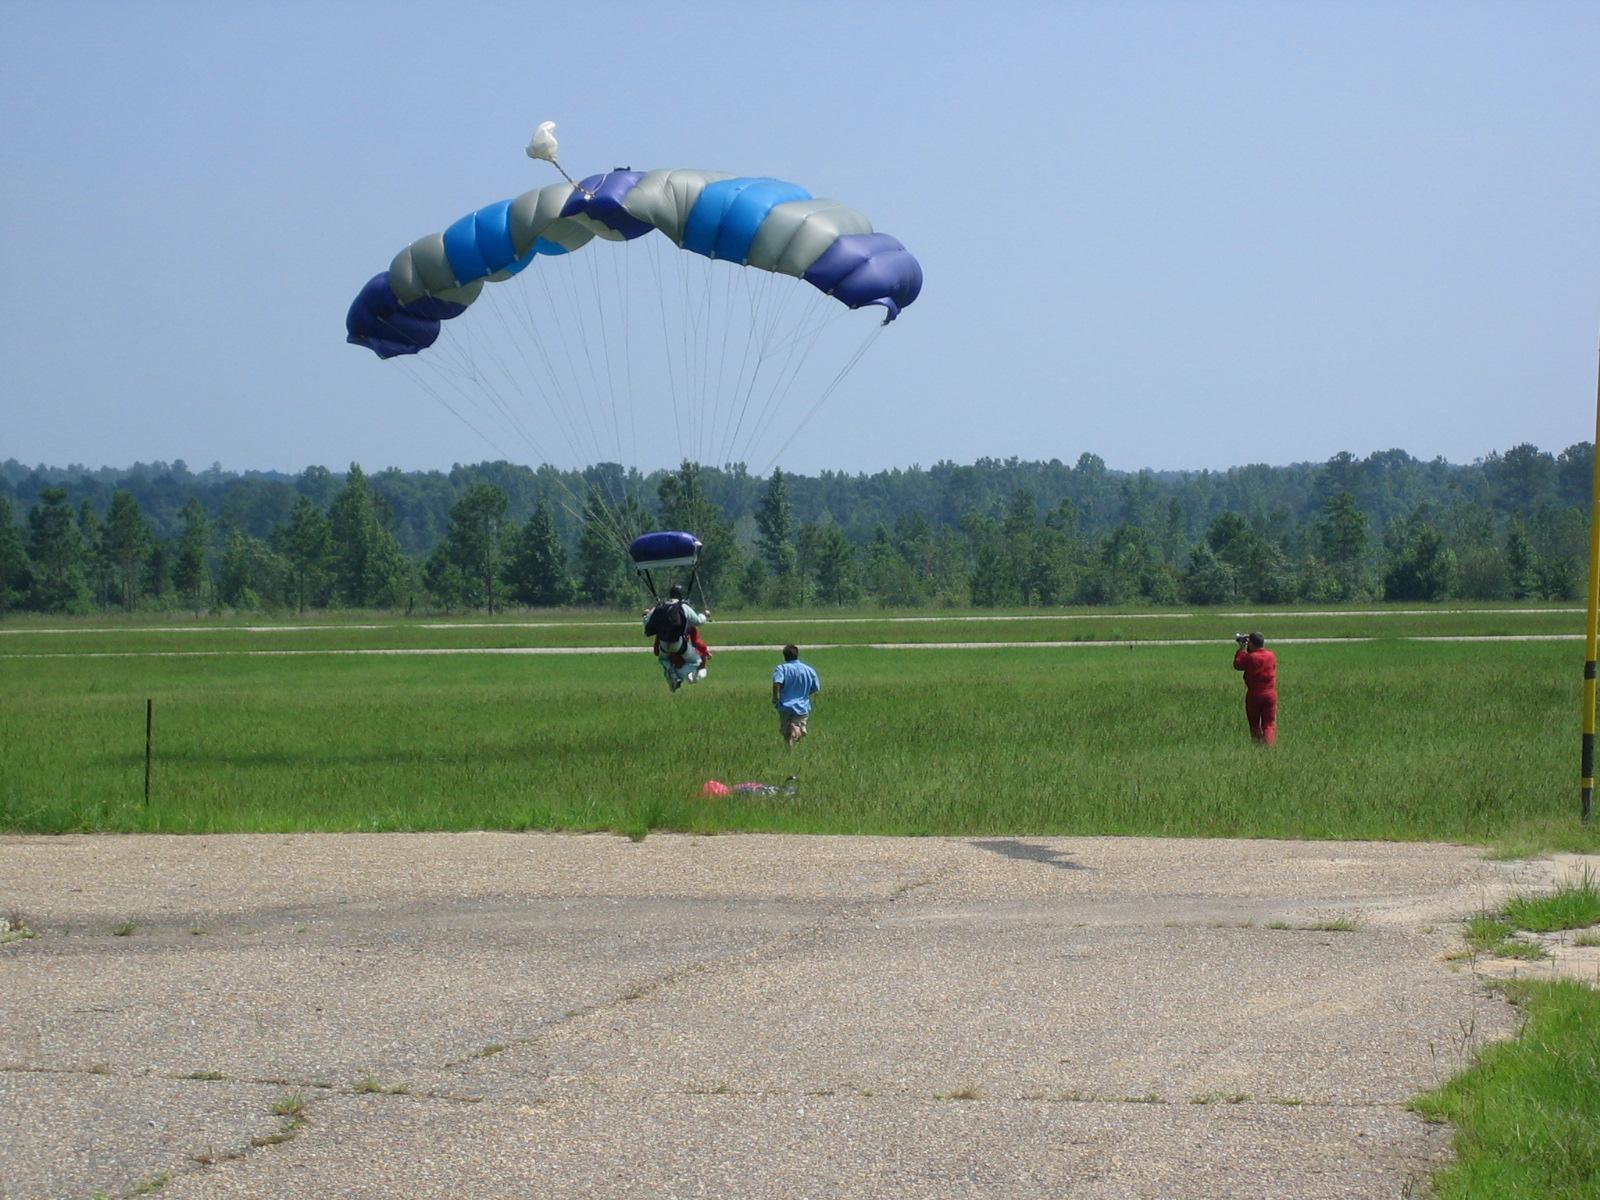 people are walking through an open field with some parachutes